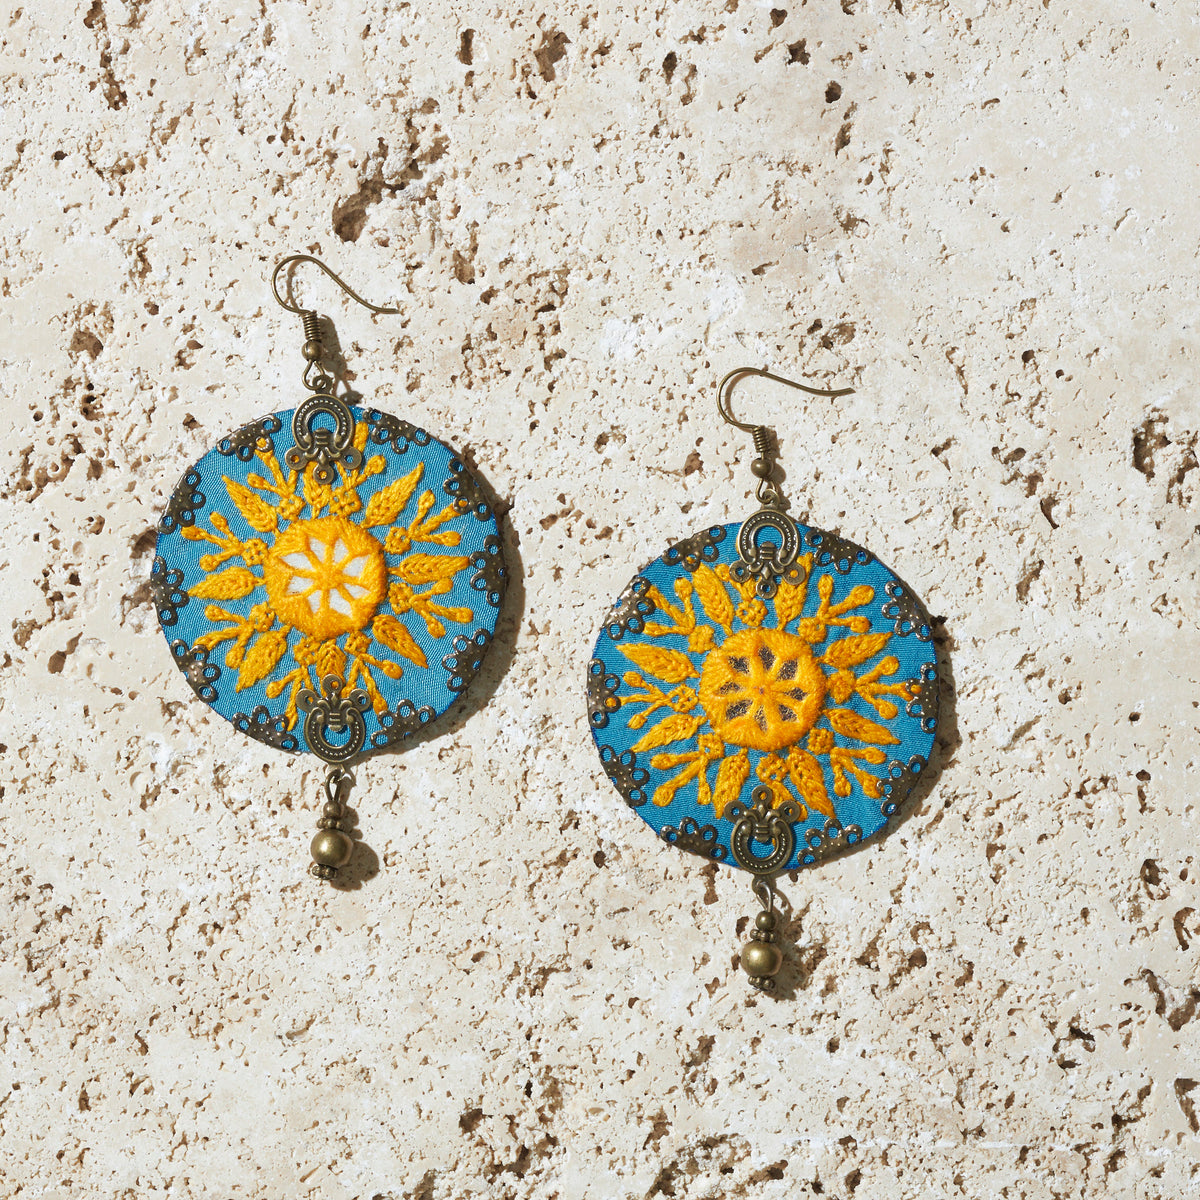 Bohemian hand made earrings. Hand embroidered mirror works earrings